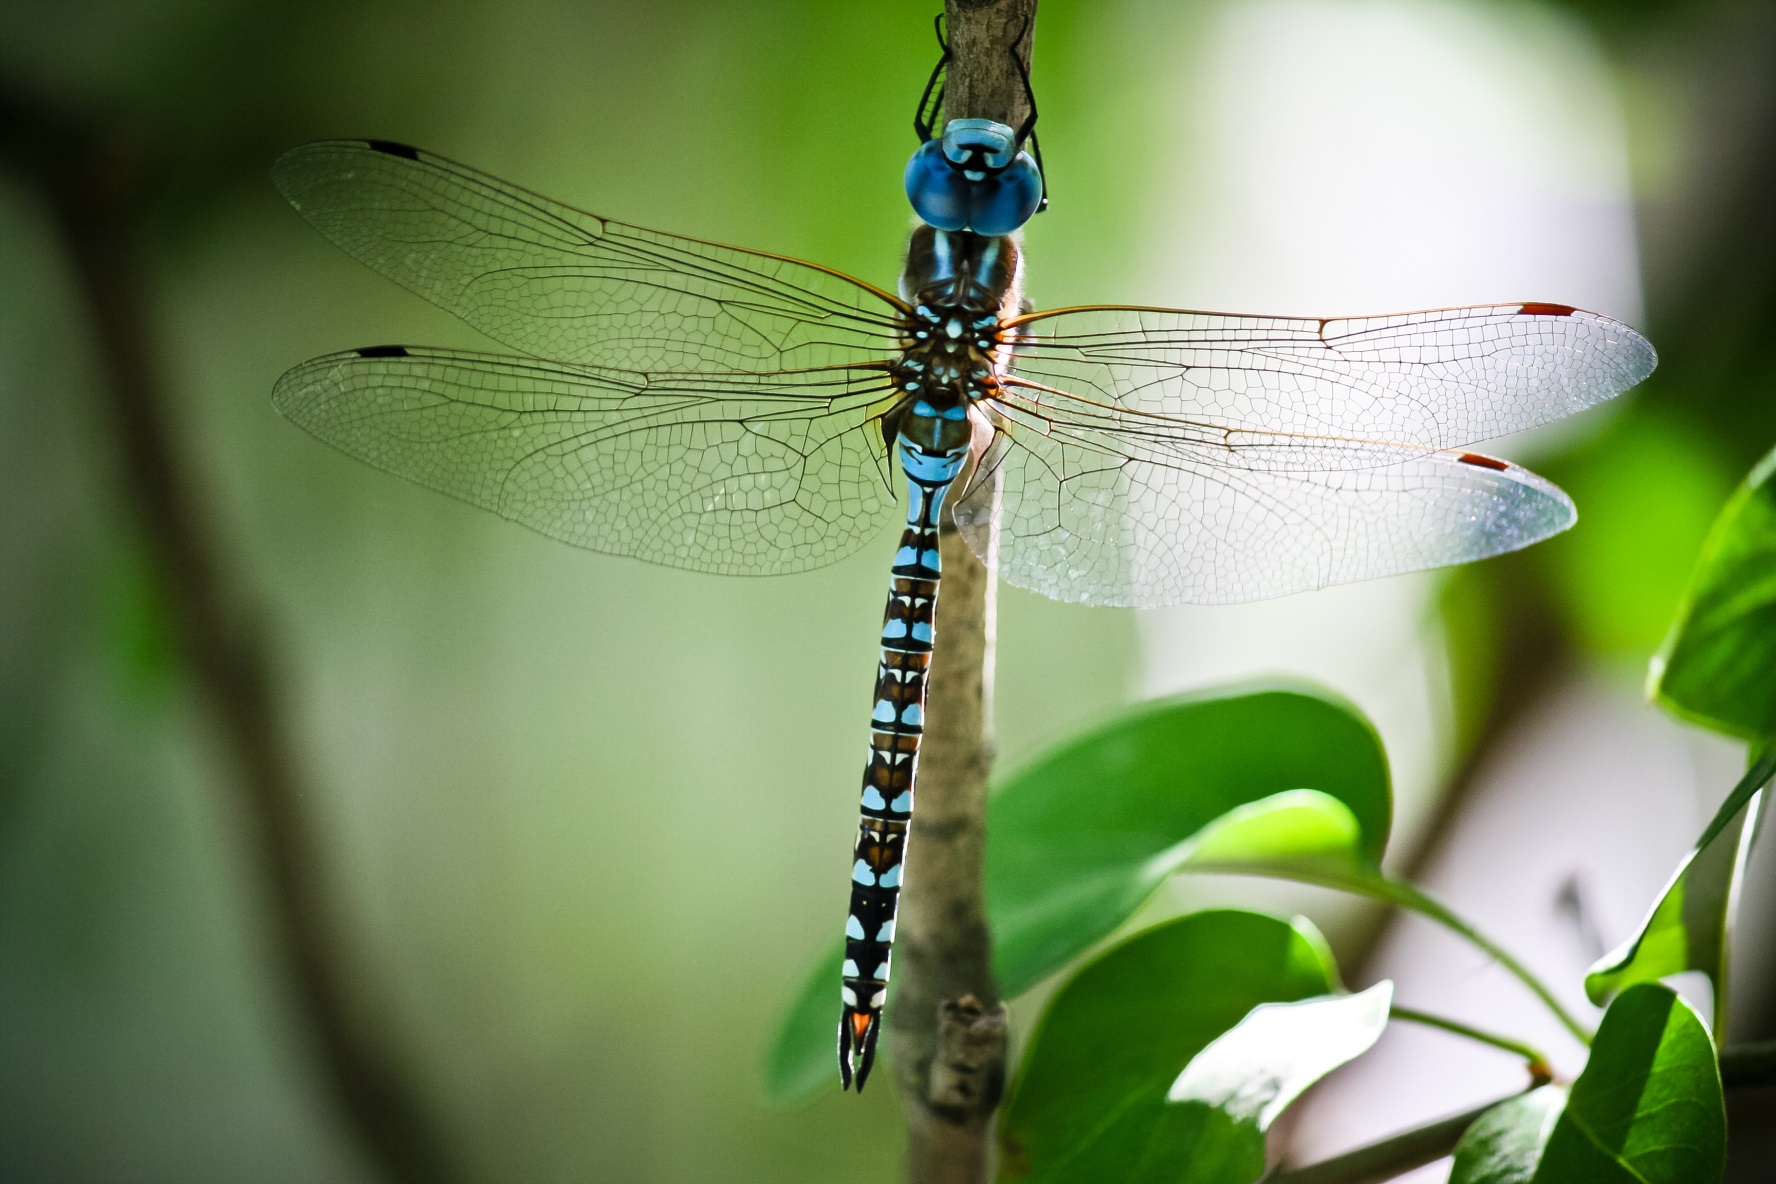 how did the dragonfly get its name and what does the word dragonfly mean in latin